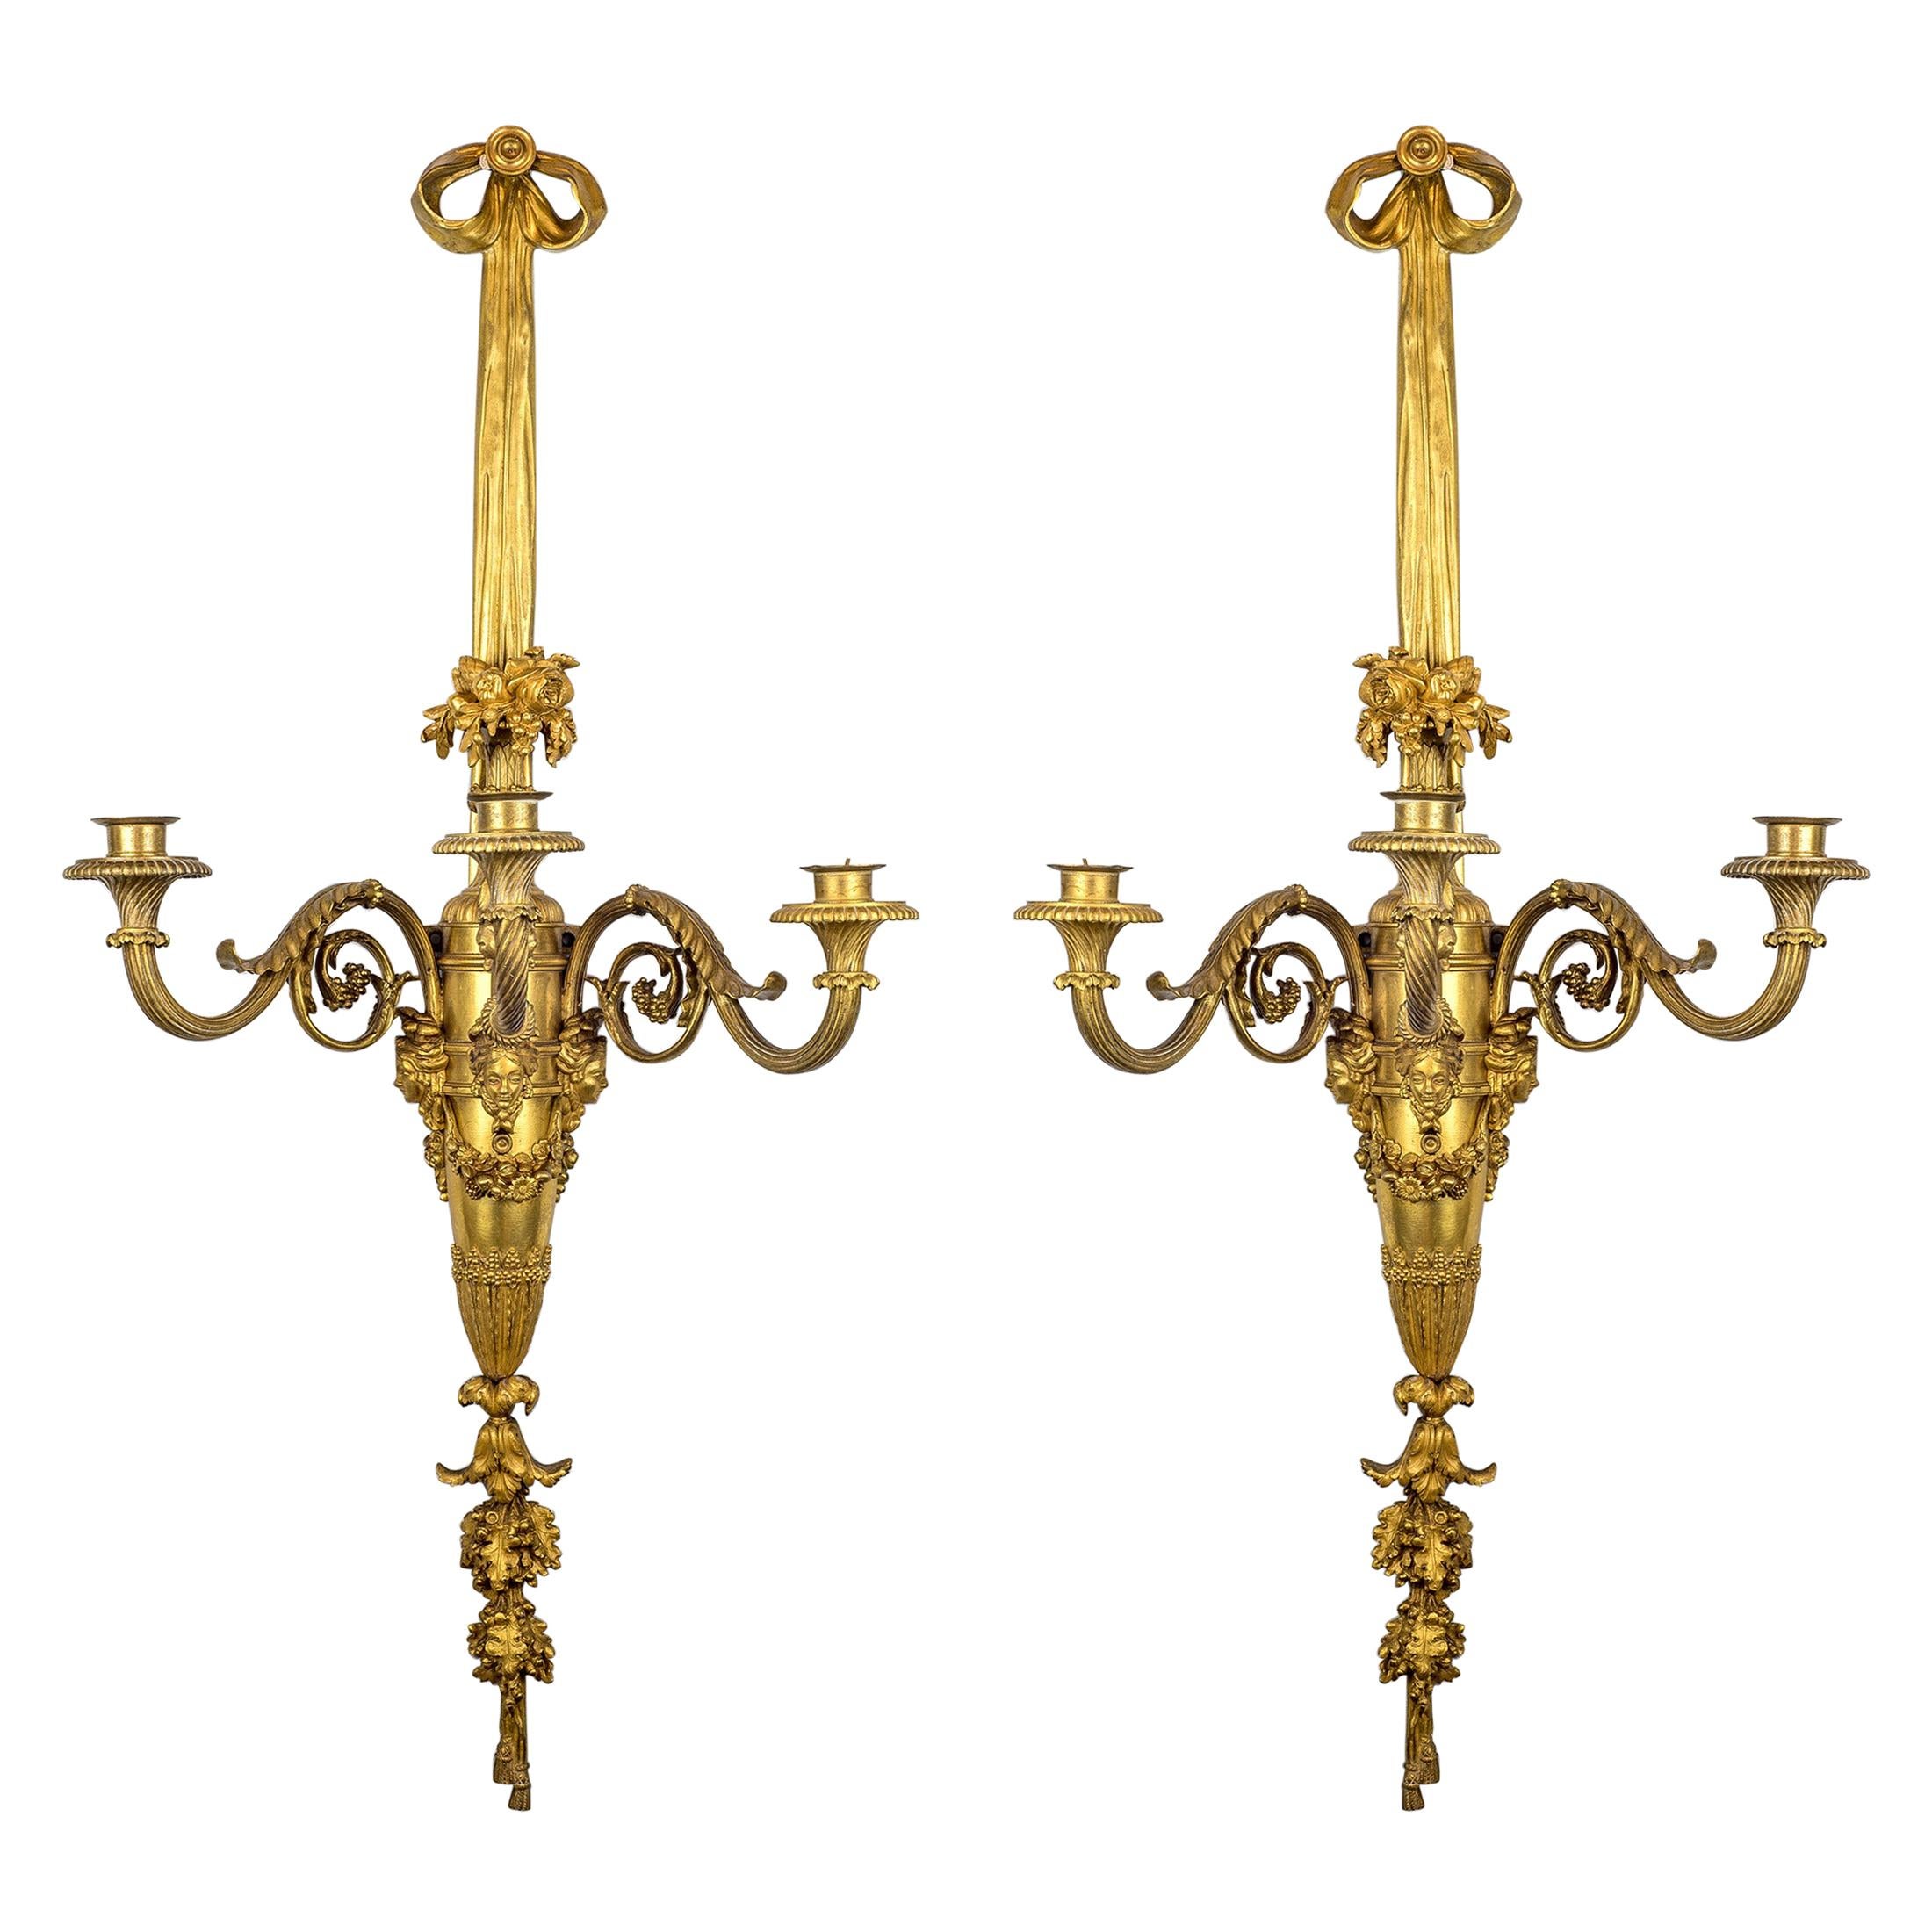 Large and Fine Pair of Henri Vian French Ormolu Three-Light Wall Light Sconces For Sale